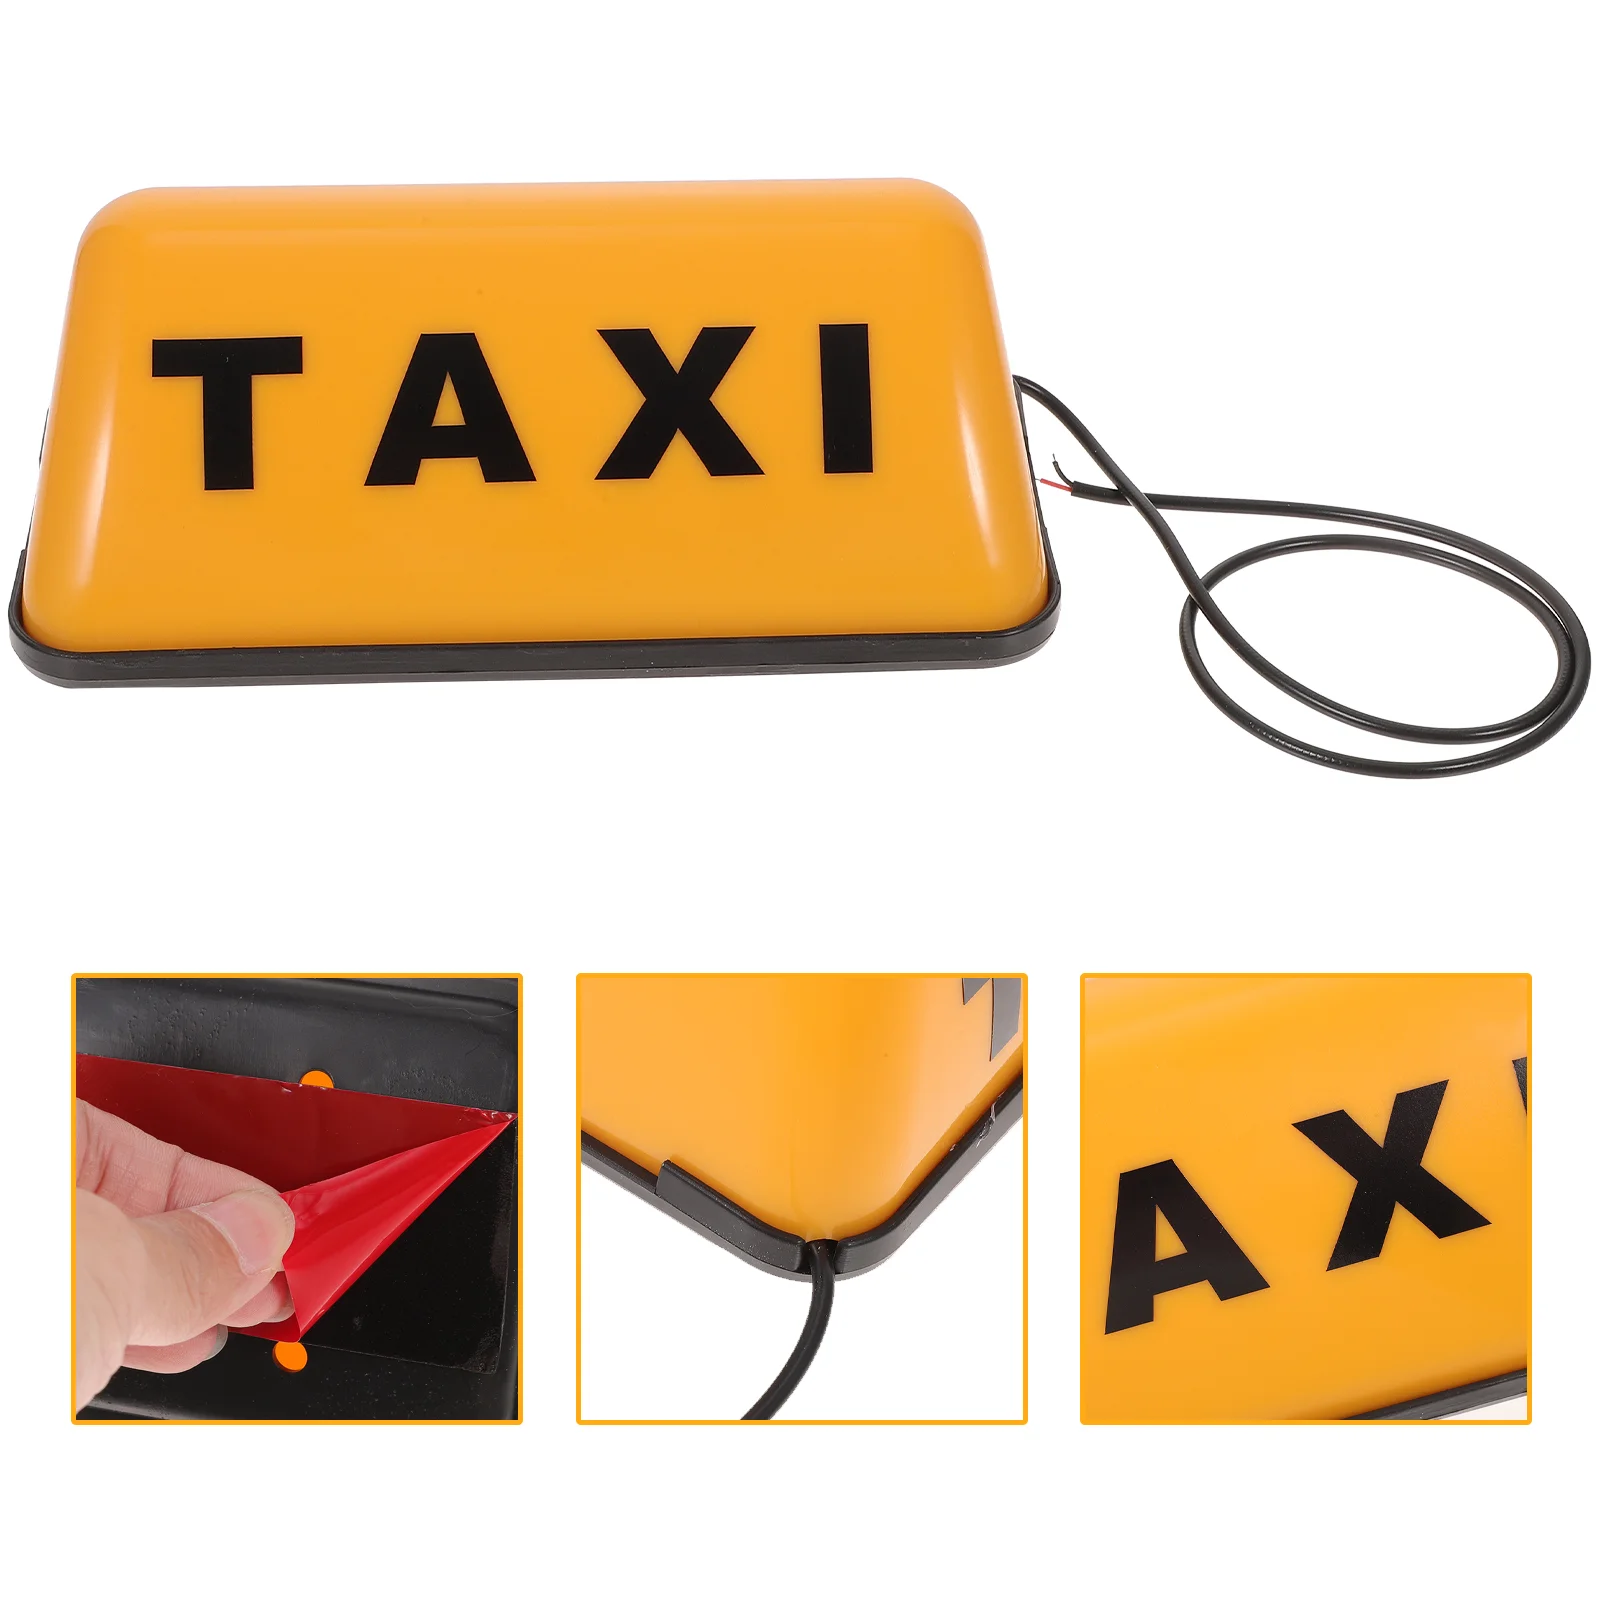 

Taxi Dome Light Car LED Lamp Sign Cab Magnetic Signs 12V Roof Illuminated Large